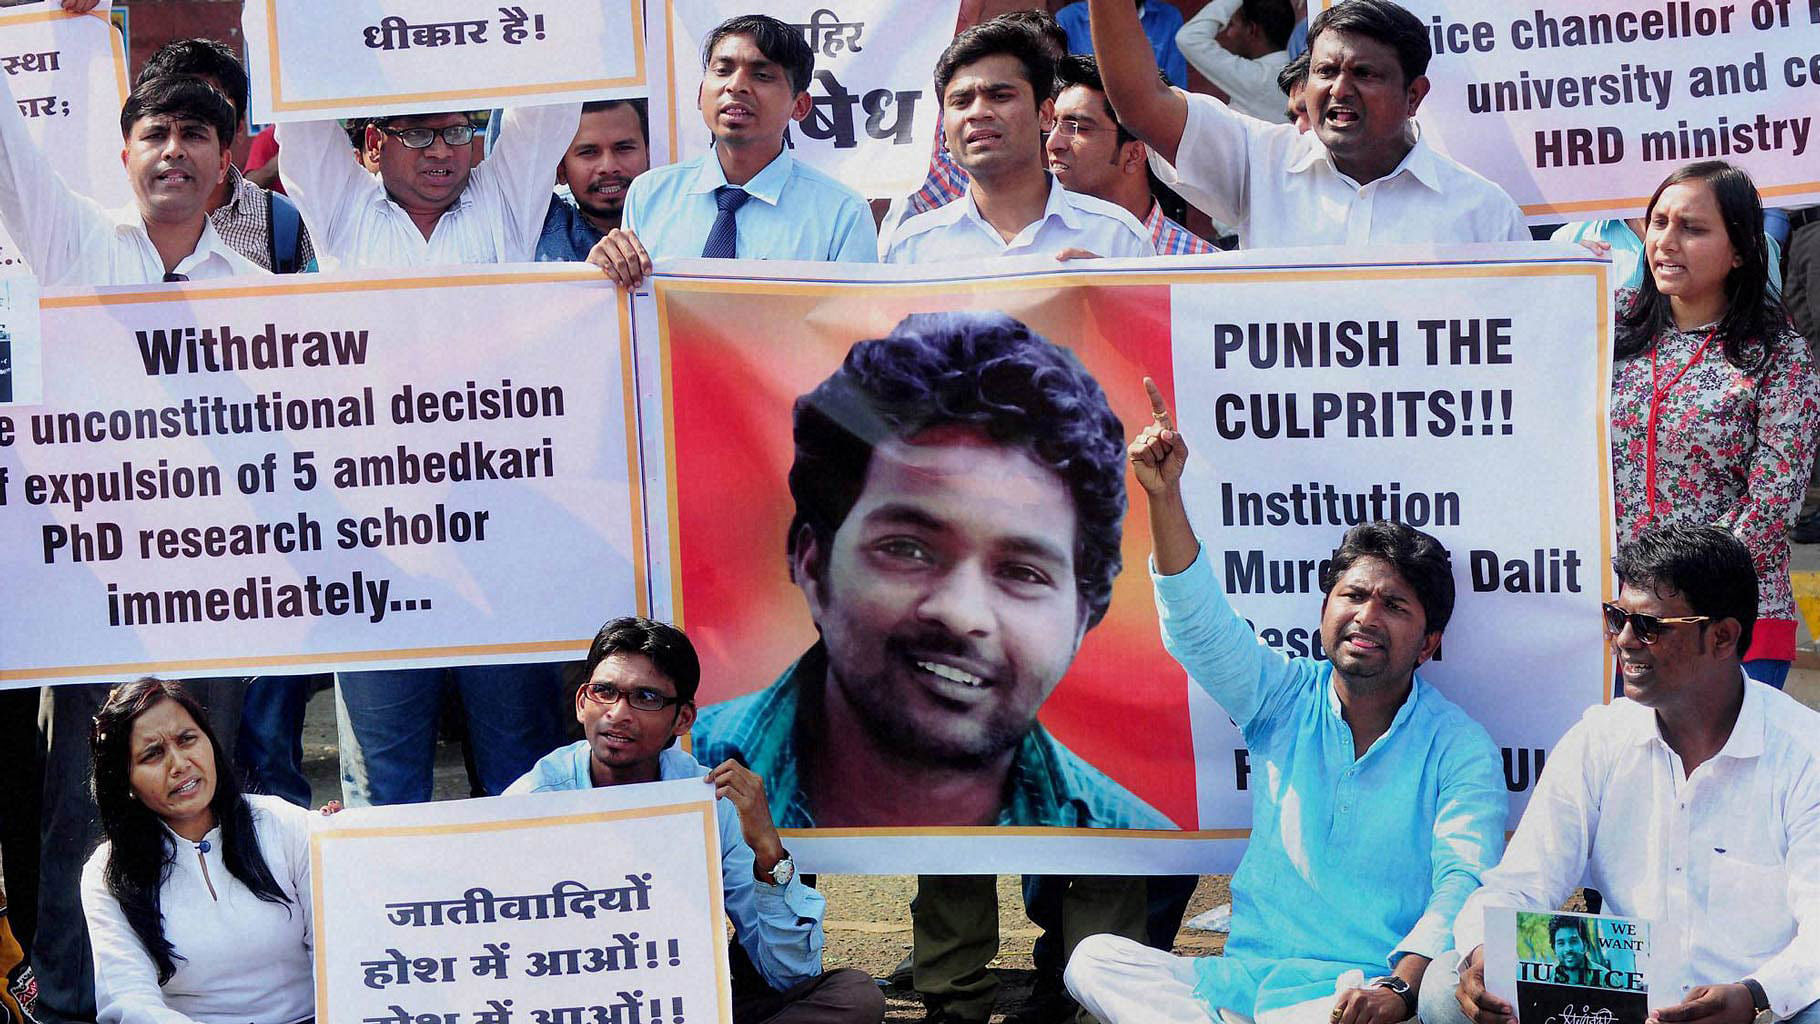 The suicide of Rohith Vemula led to mass protests in the country. (Photo: <b>The Quint</b>)